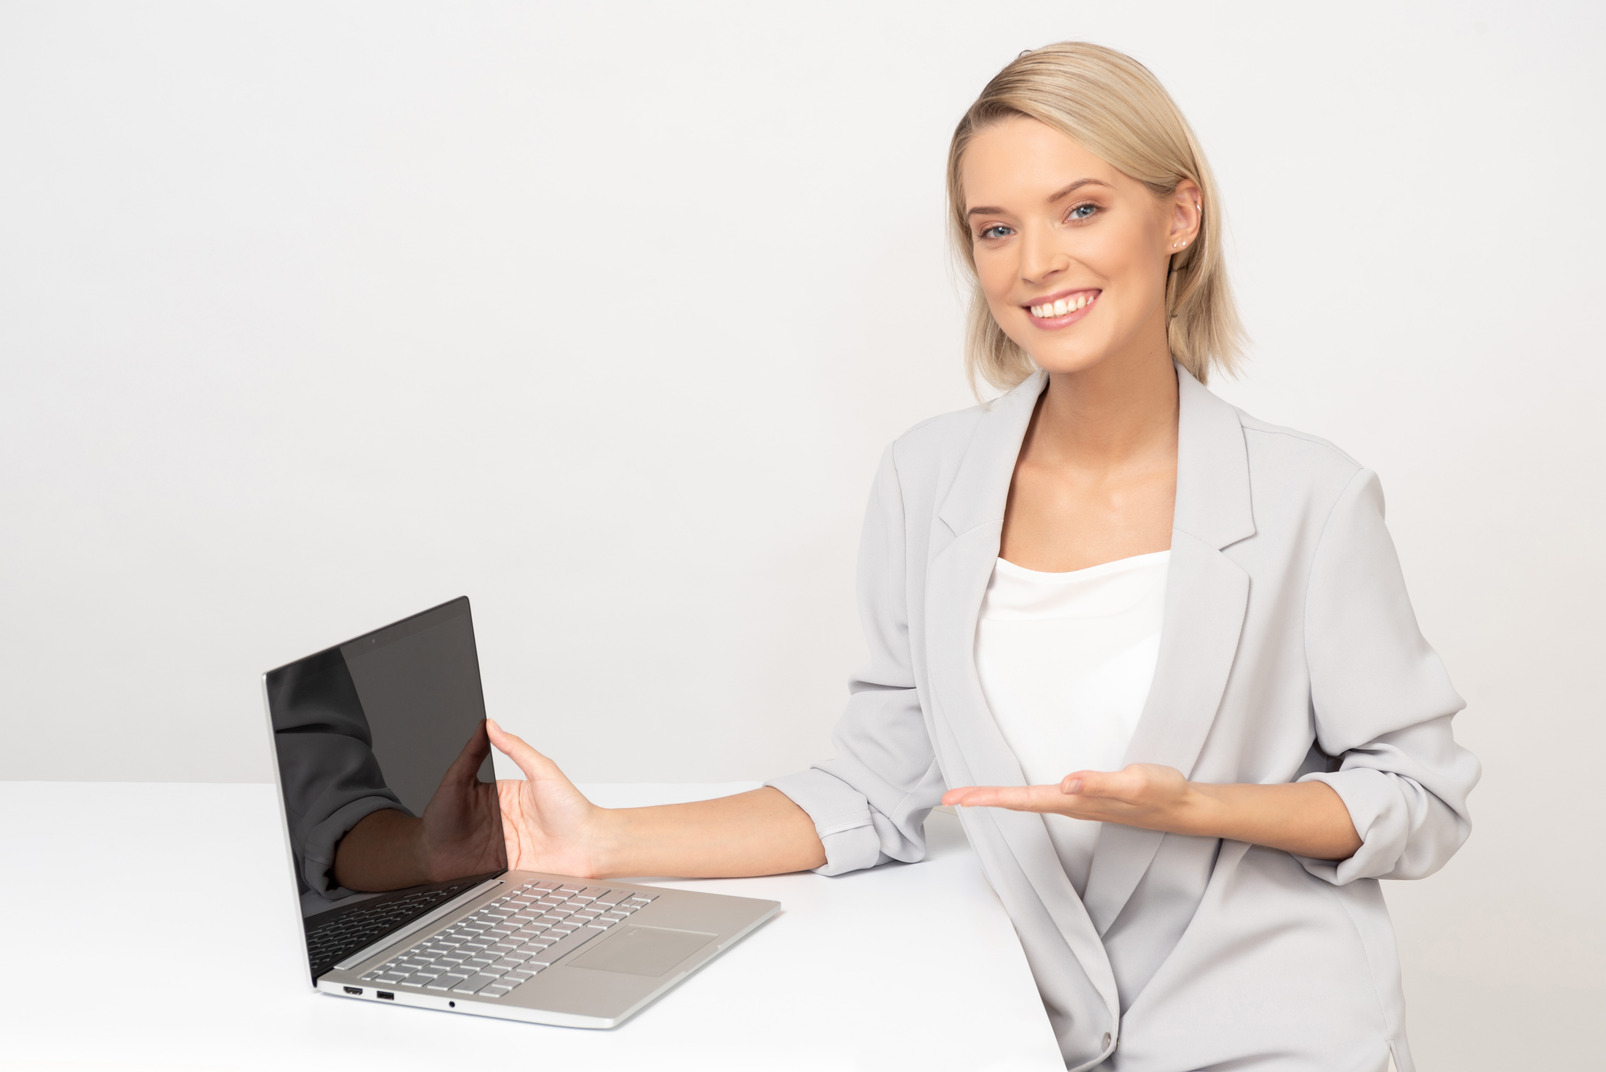 Young businesswoman showing her laptop